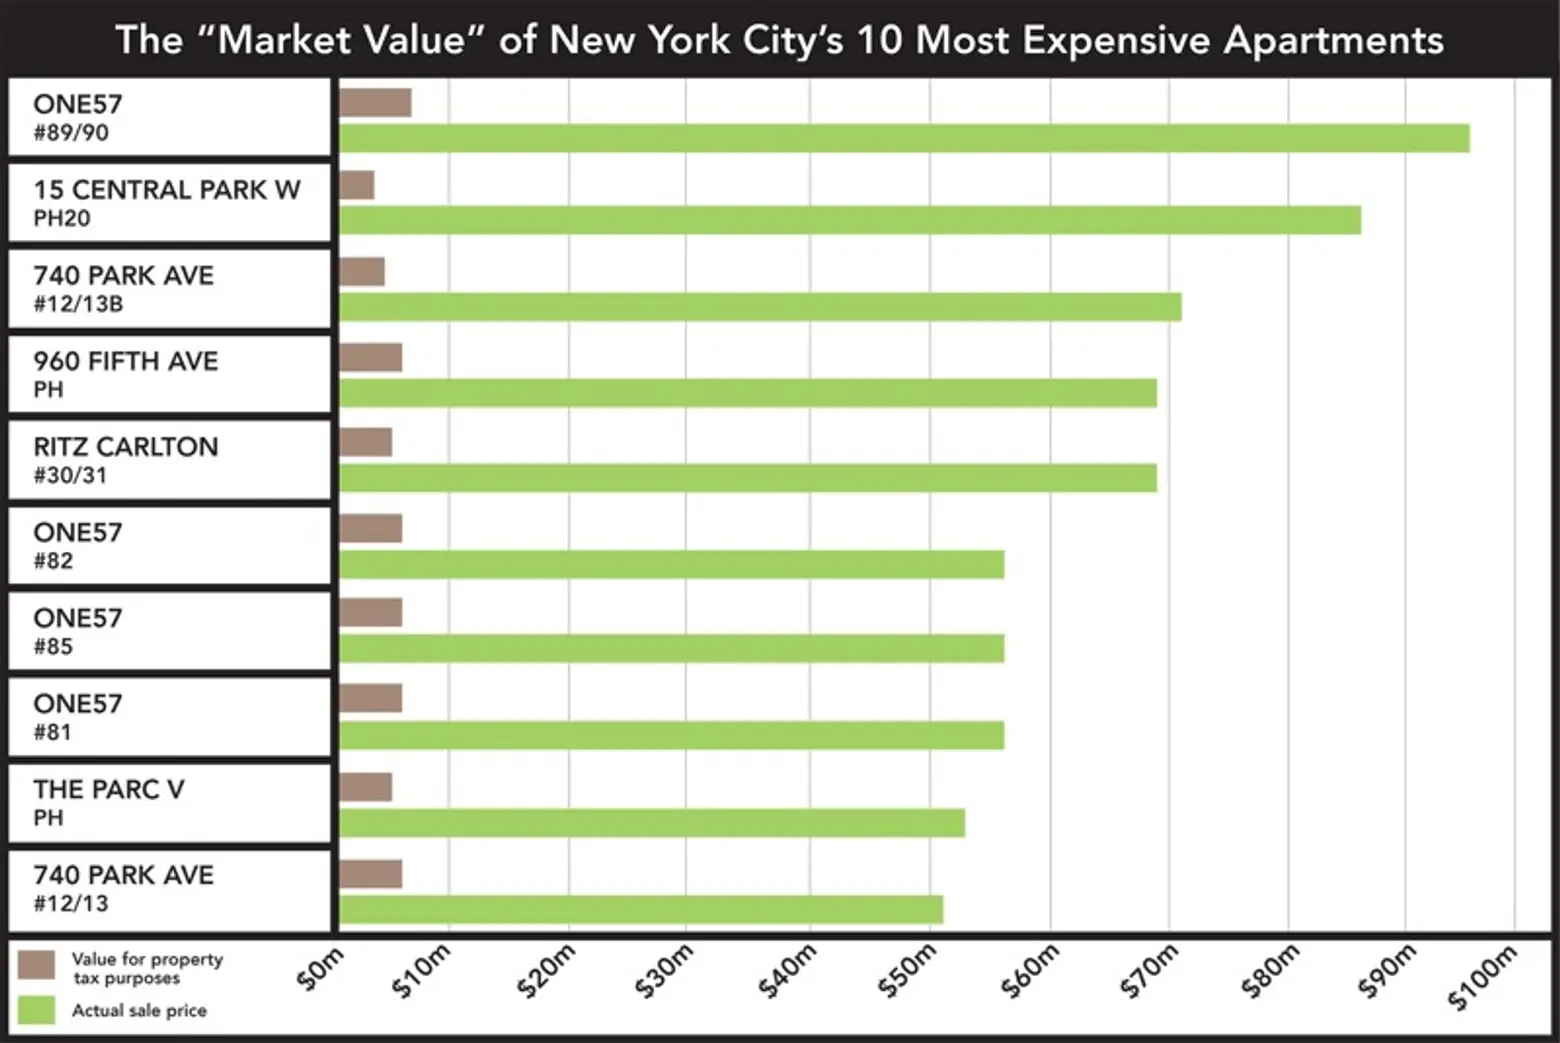 Charting the Property Taxes of the City’s 10 Most Expensive Apartments